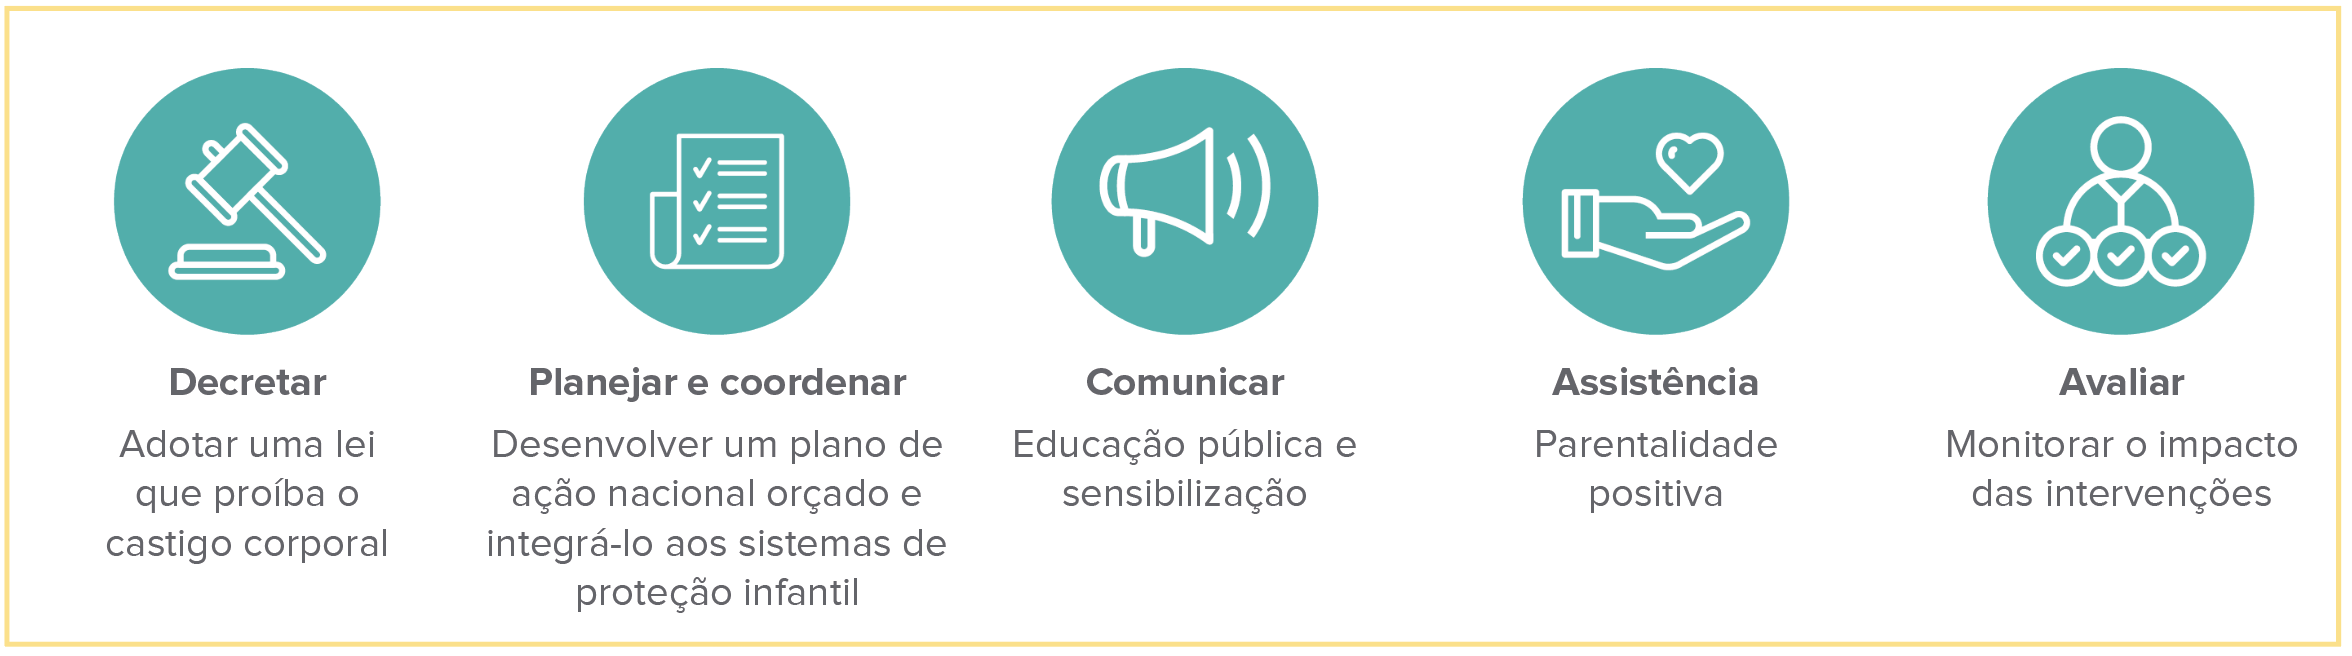 The key steps for moving from prohibition to elimination of corporal punishment Portuguese